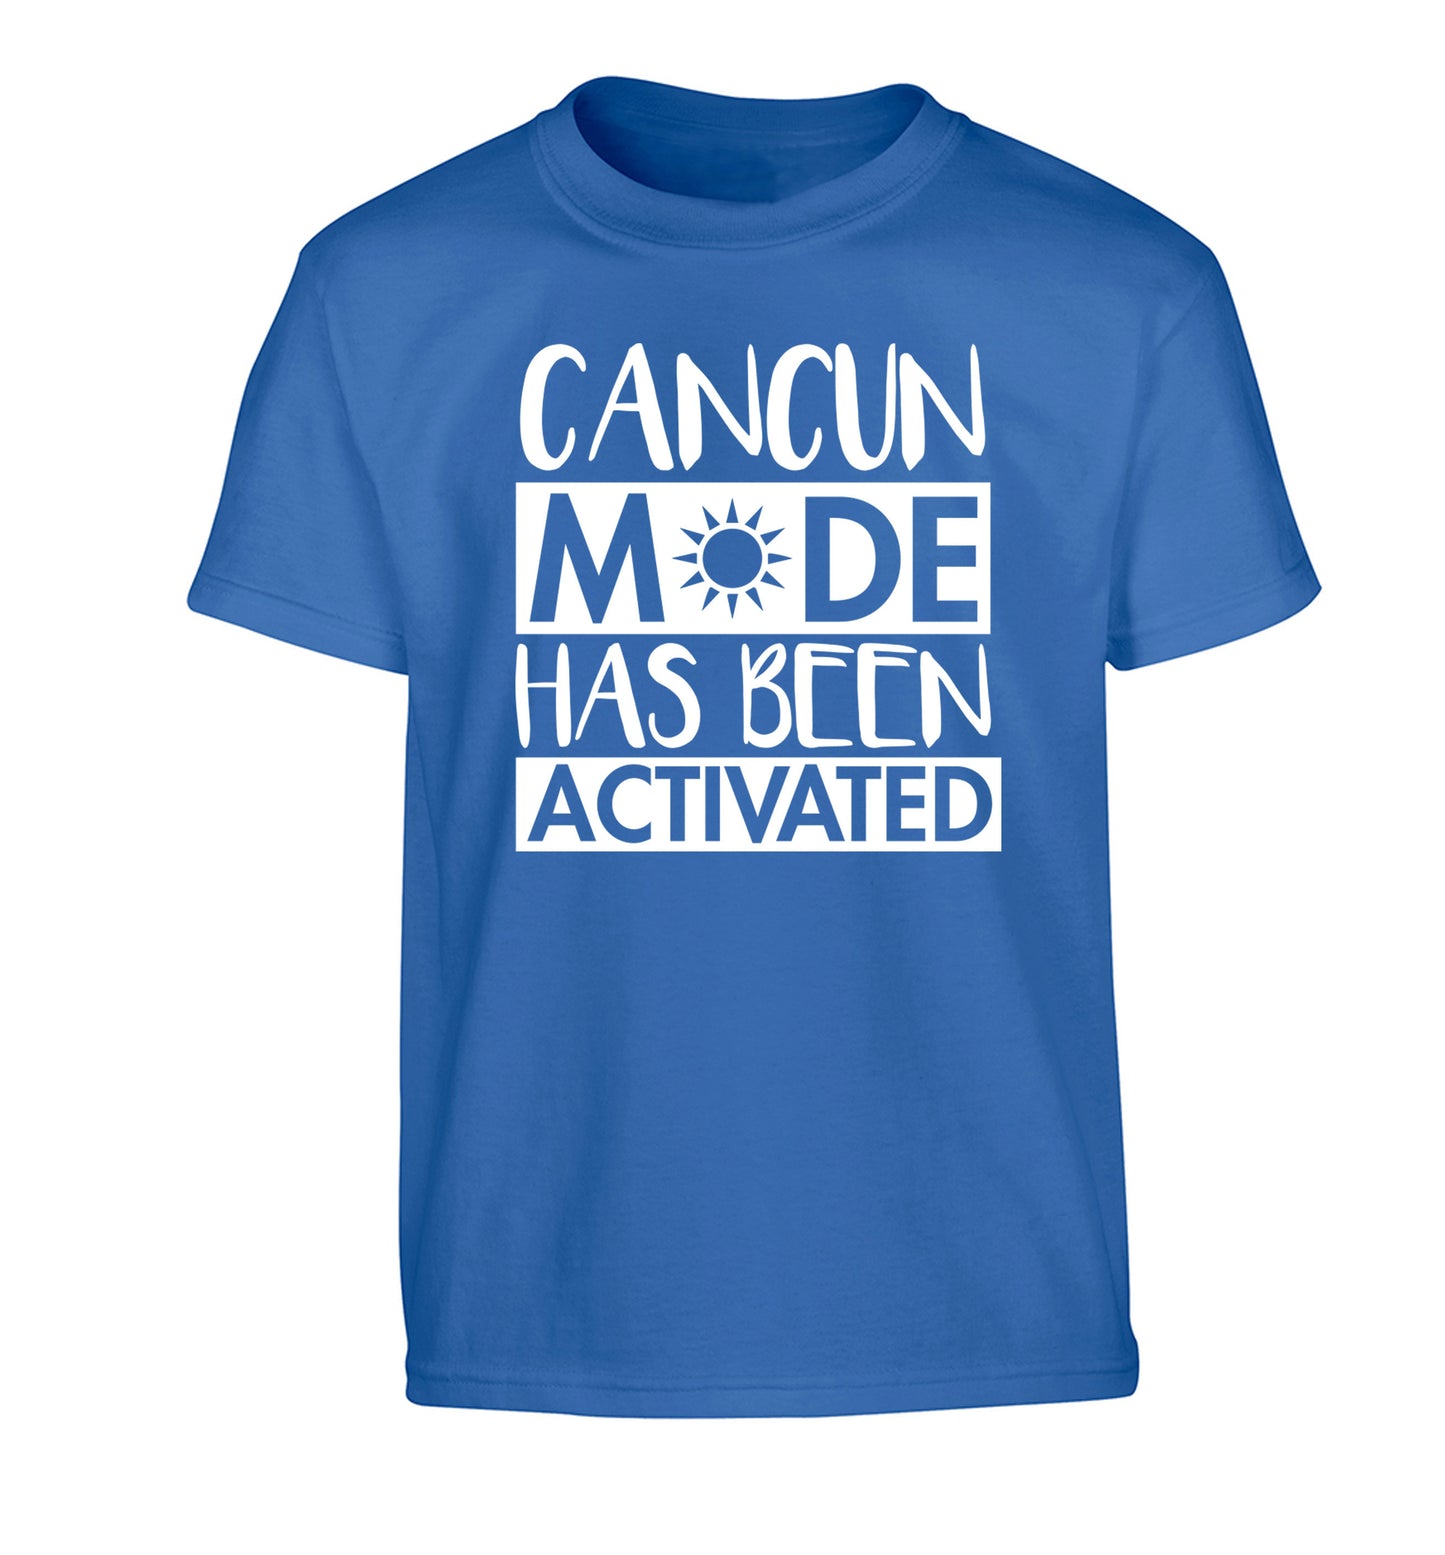 Cancun mode has been activated Children's blue Tshirt 12-14 Years